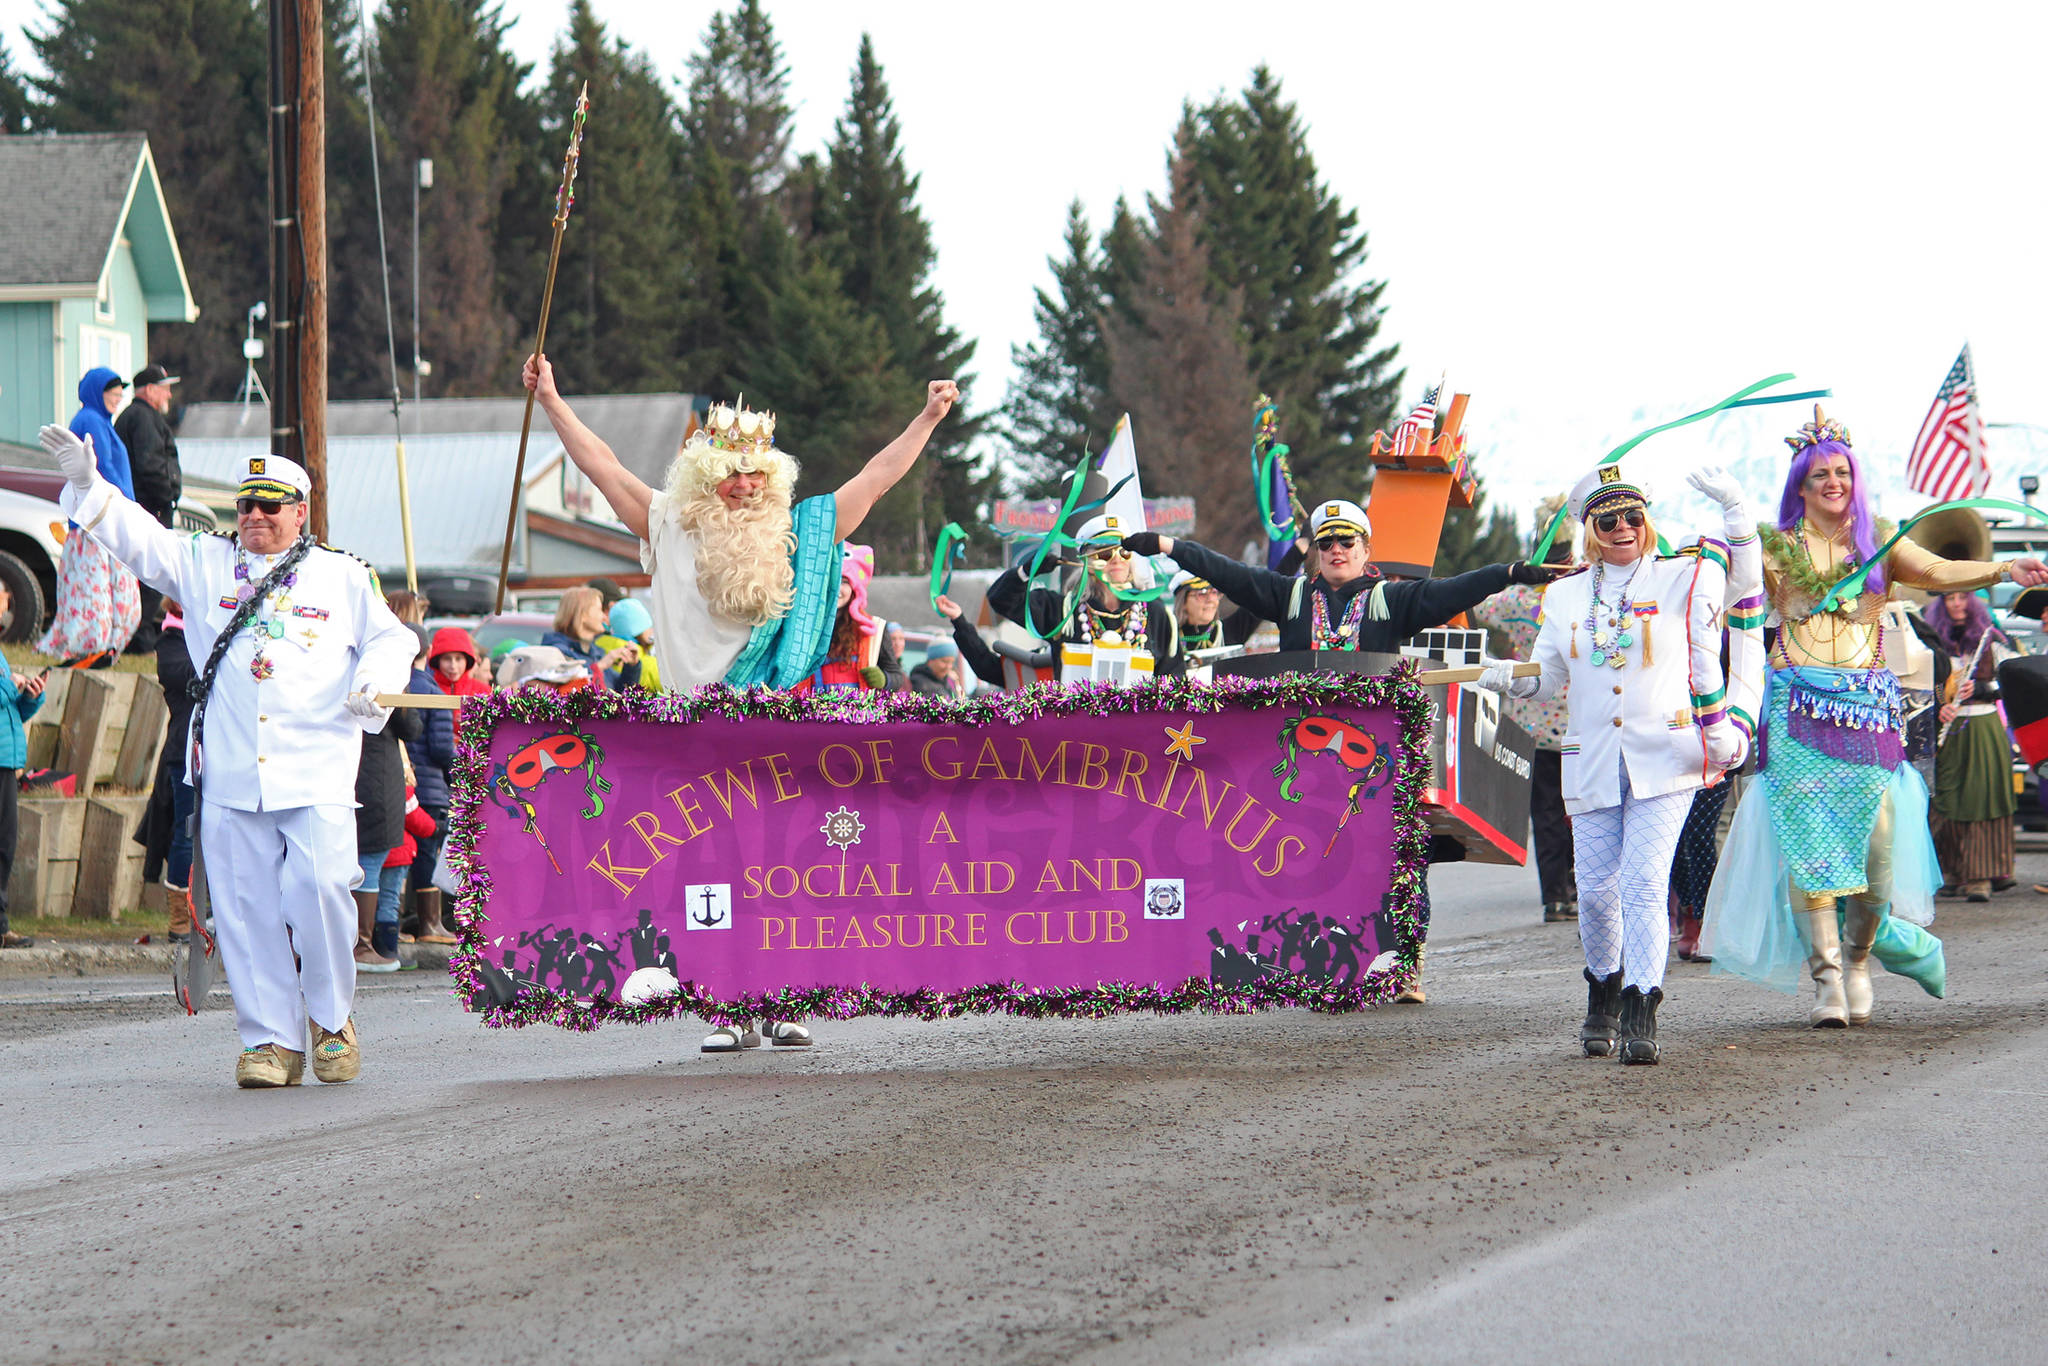 Members of the Krewe of Gambrinus march down Pioneer Avenue on Saturday, Feb. 9, 2019 during the Winter Carnival Parade in Homer, Alaska. (Homer News file photo)